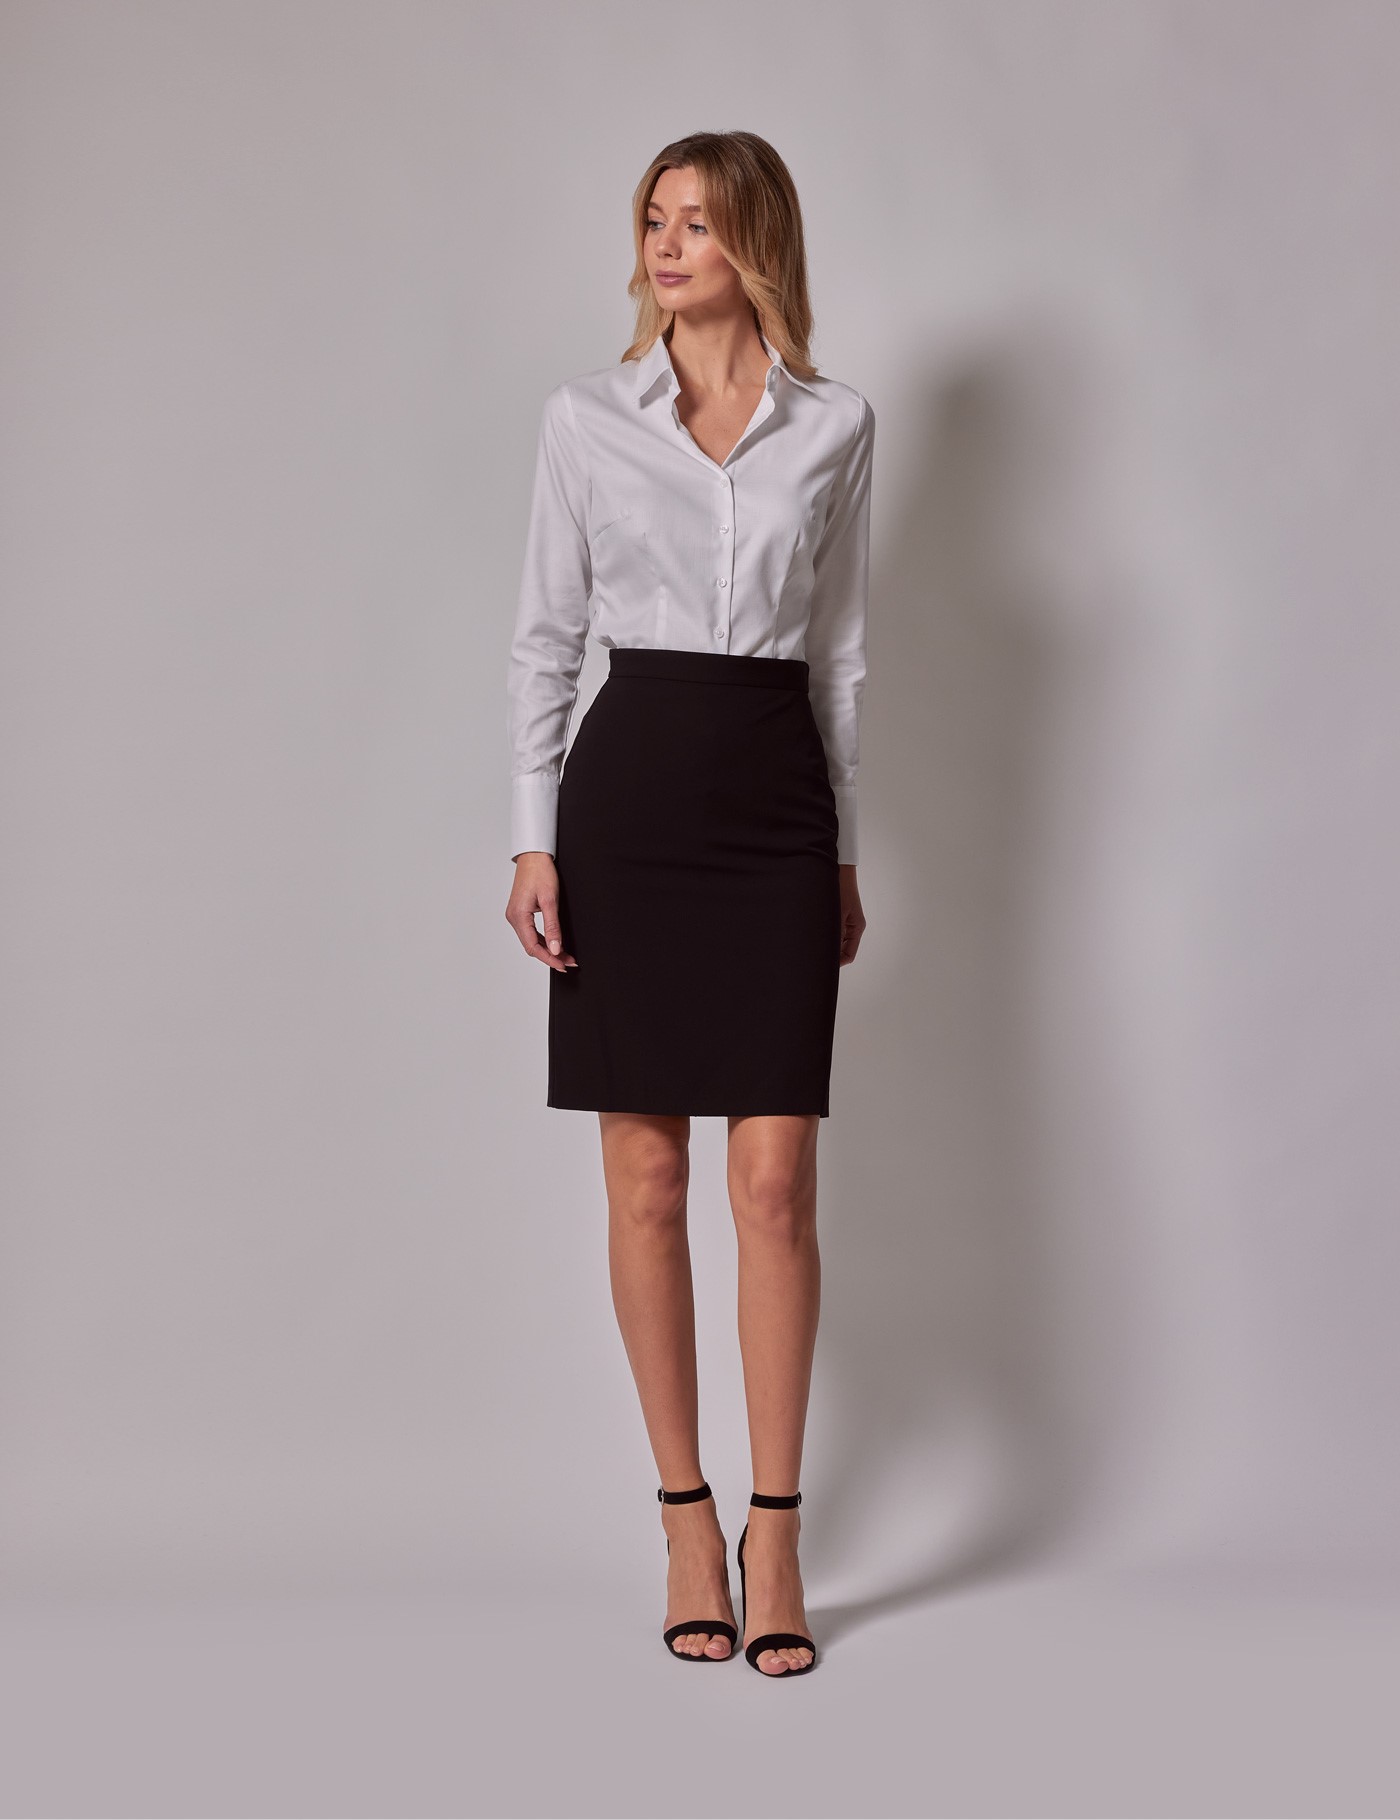 pencil skirt – The Ambition Collective